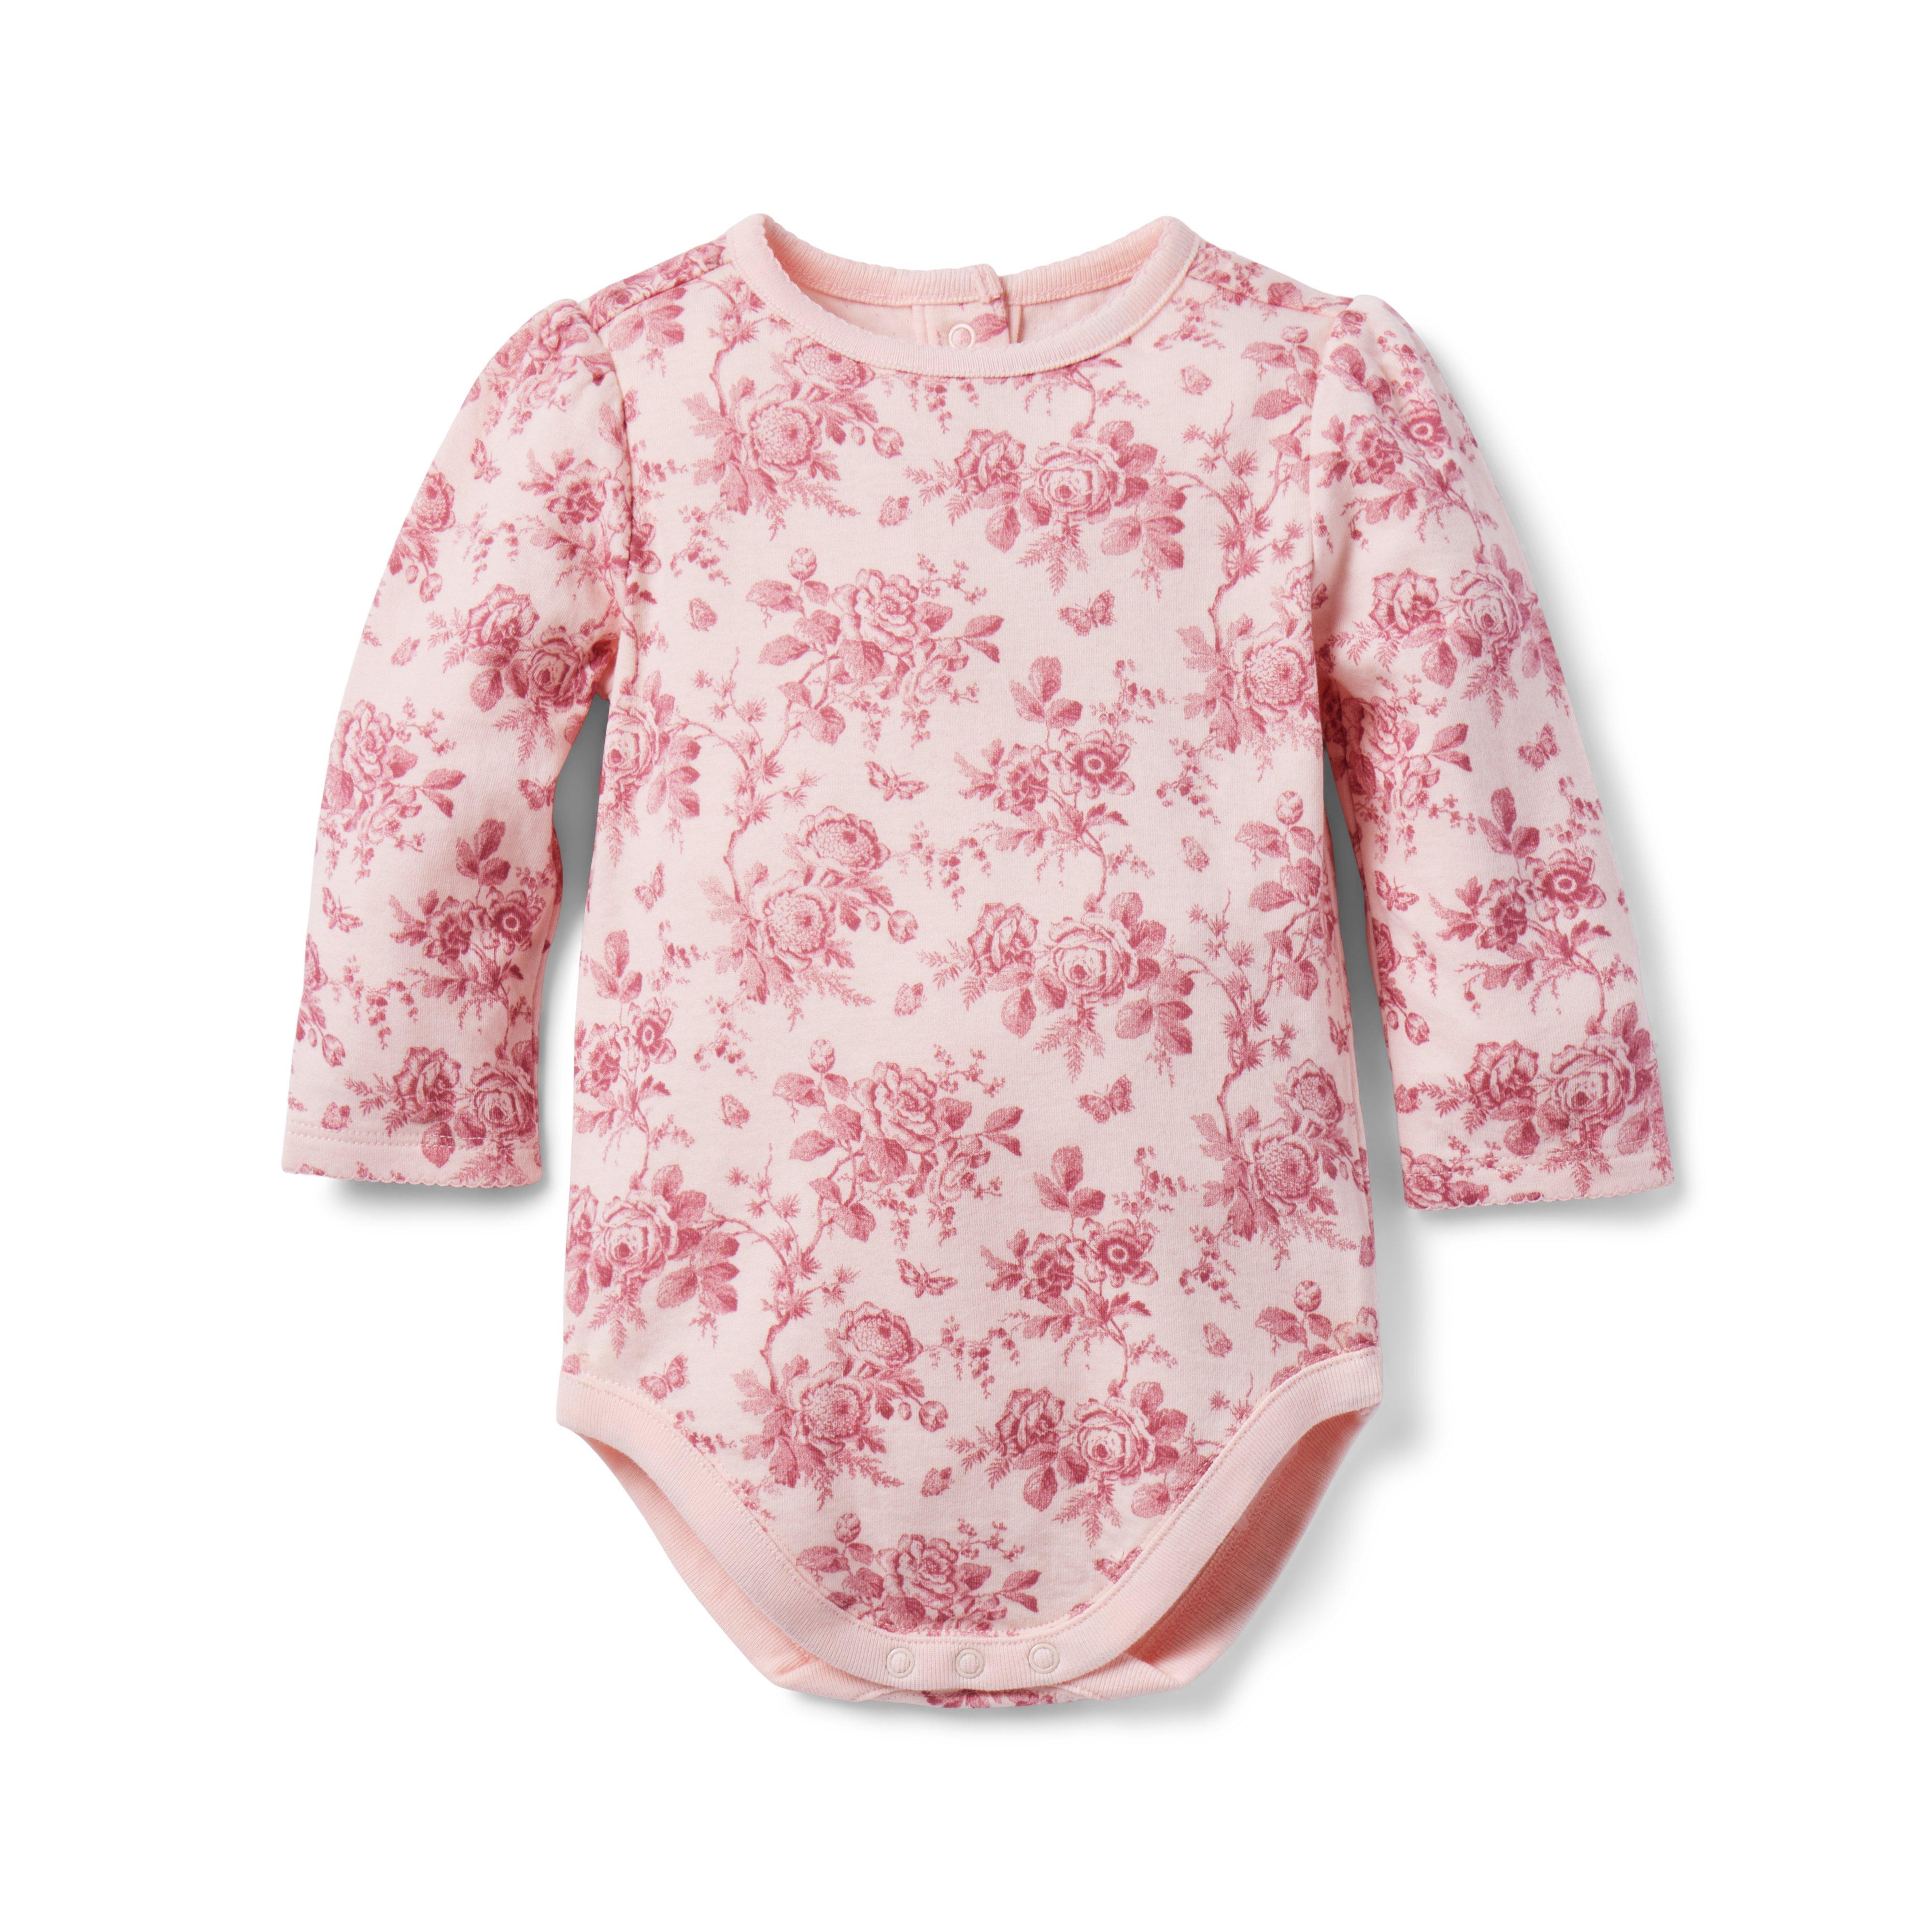 Baby Floral Toile Bodysuit